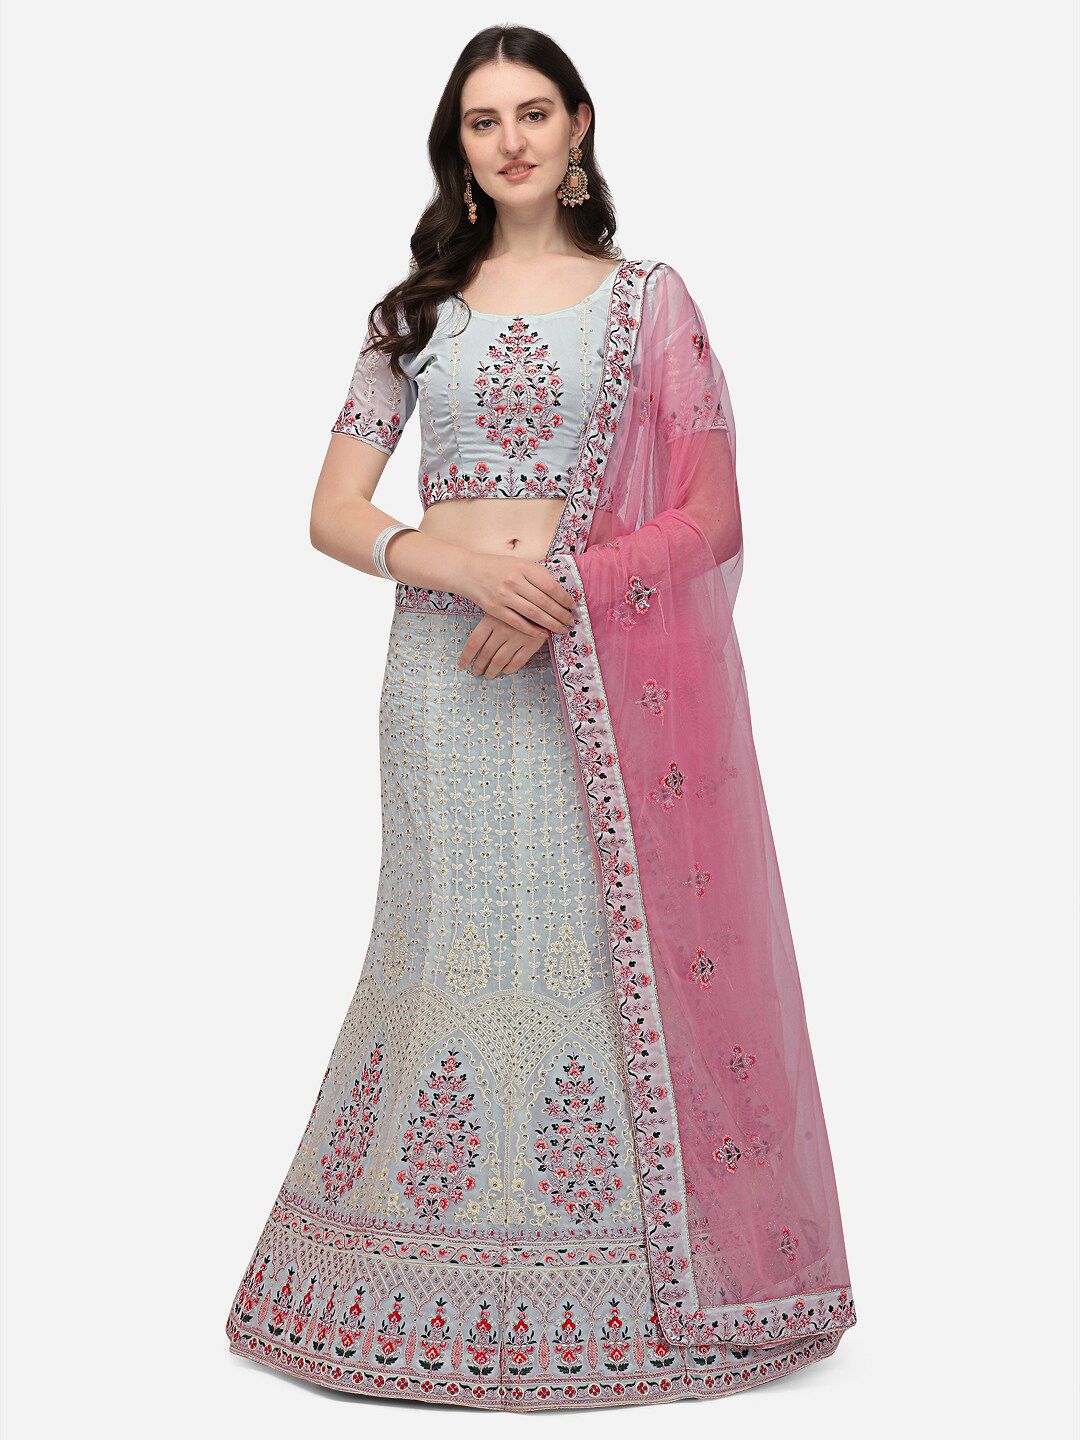 VRSALES Turquoise Blue & Red Embroidered Semi-Stitched Lehenga & Unstitched Blouse With Dupatta Price in India